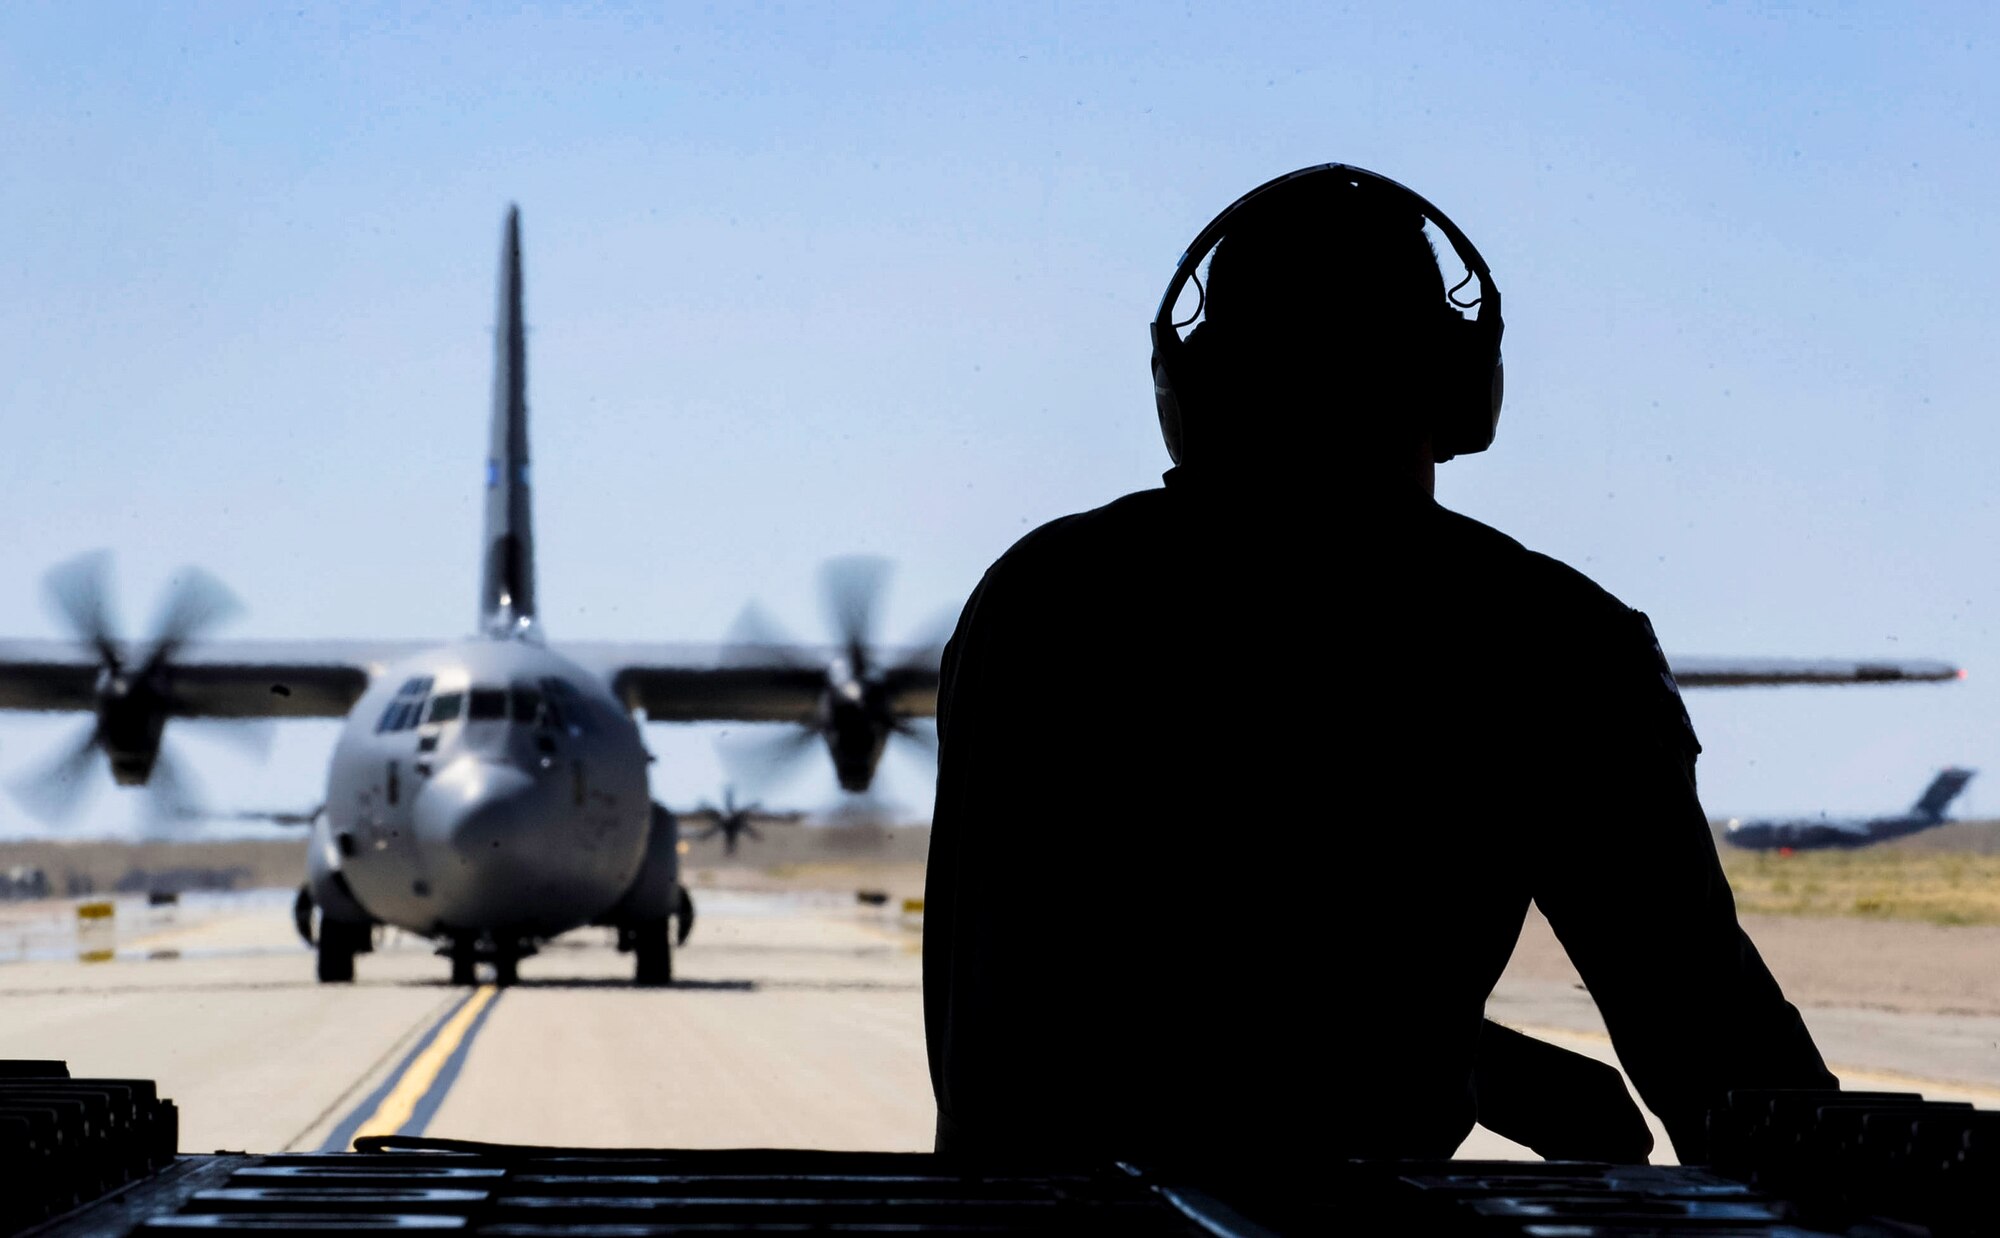 A crew chief sits on the ramp of a C-130J Super Hercules during a Weapons School Integration mission on the Nevada Test and Training Range, Nev., June 2, 2017. While landed, the cargo aircraft simulated loading nearly 1,000 people as part of the overall mission. (U.S. Air Force photo by Senior Airman Kevin Tanenbaum/Released) 